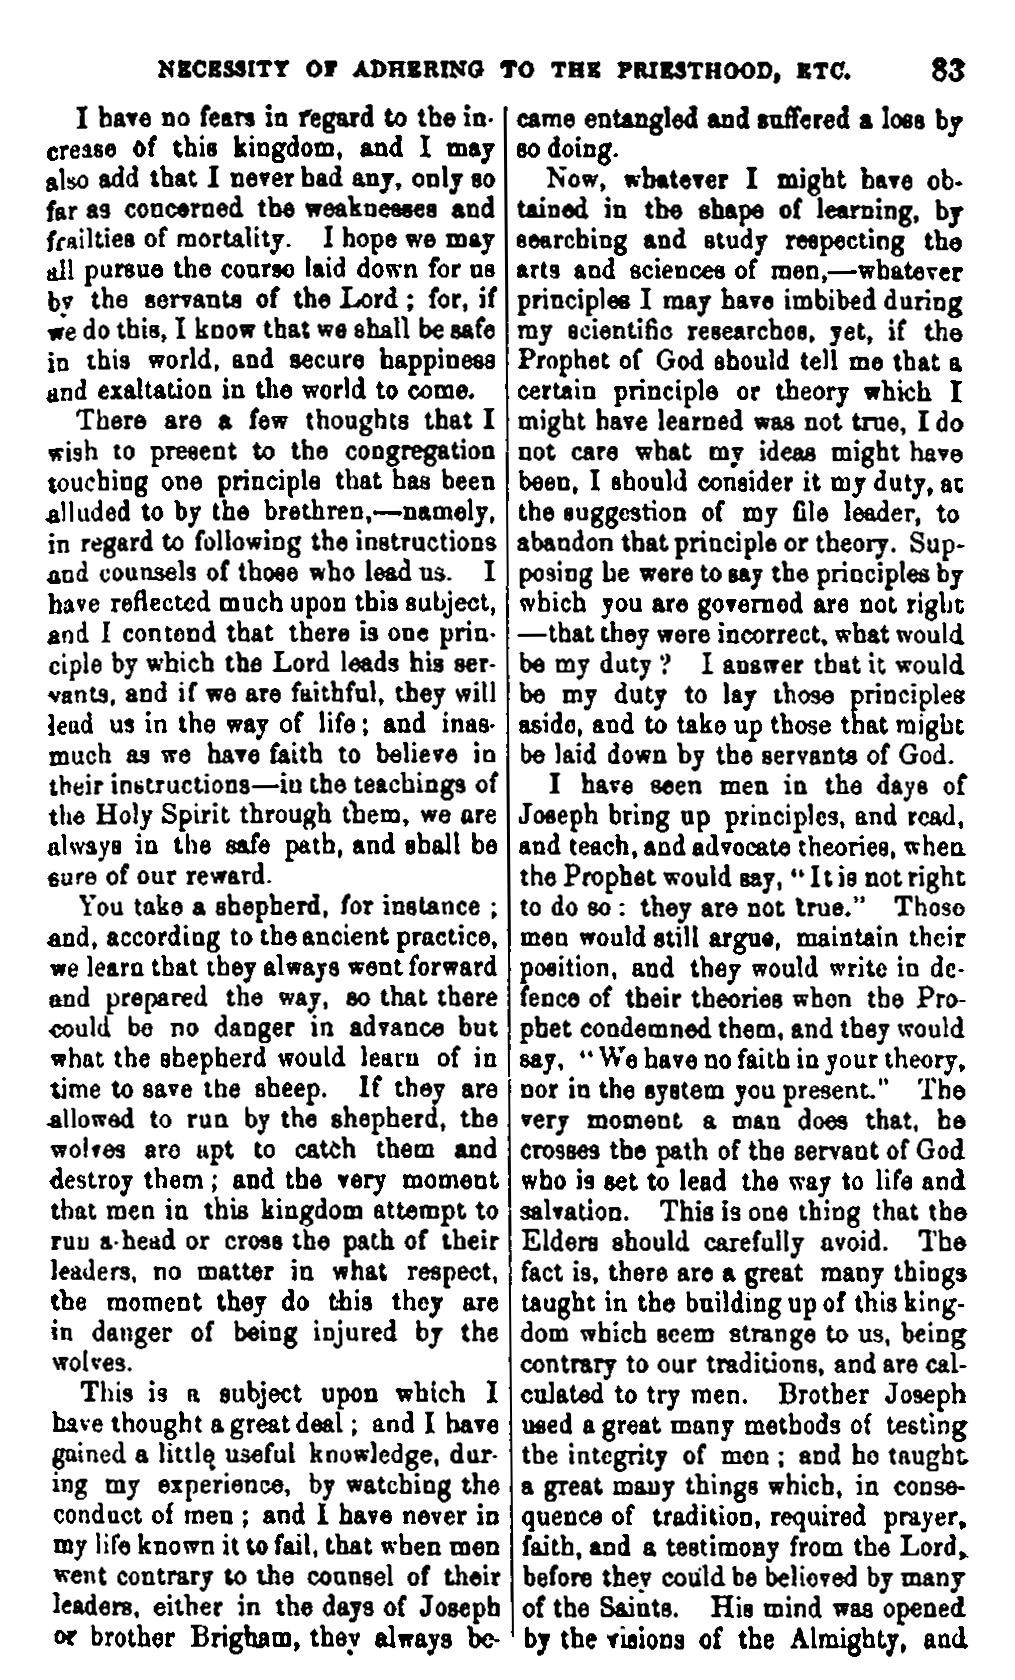 Journal of Discourses, vol. 5, p. 83 (1857) 